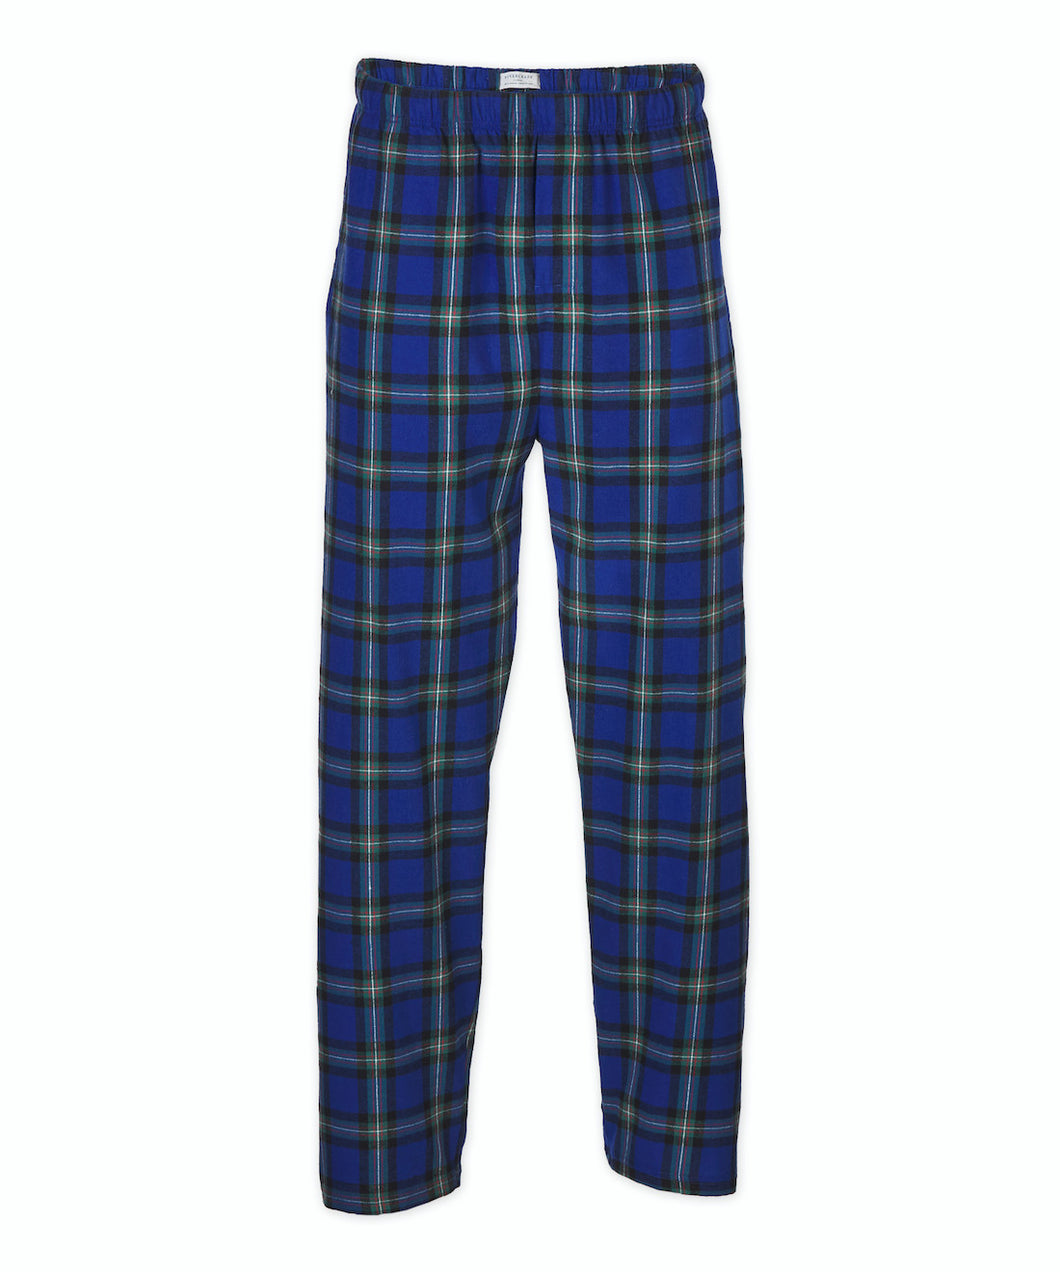 100% Cozy and Warm Flannel Pajama Pants for Men in a Variety of Colors